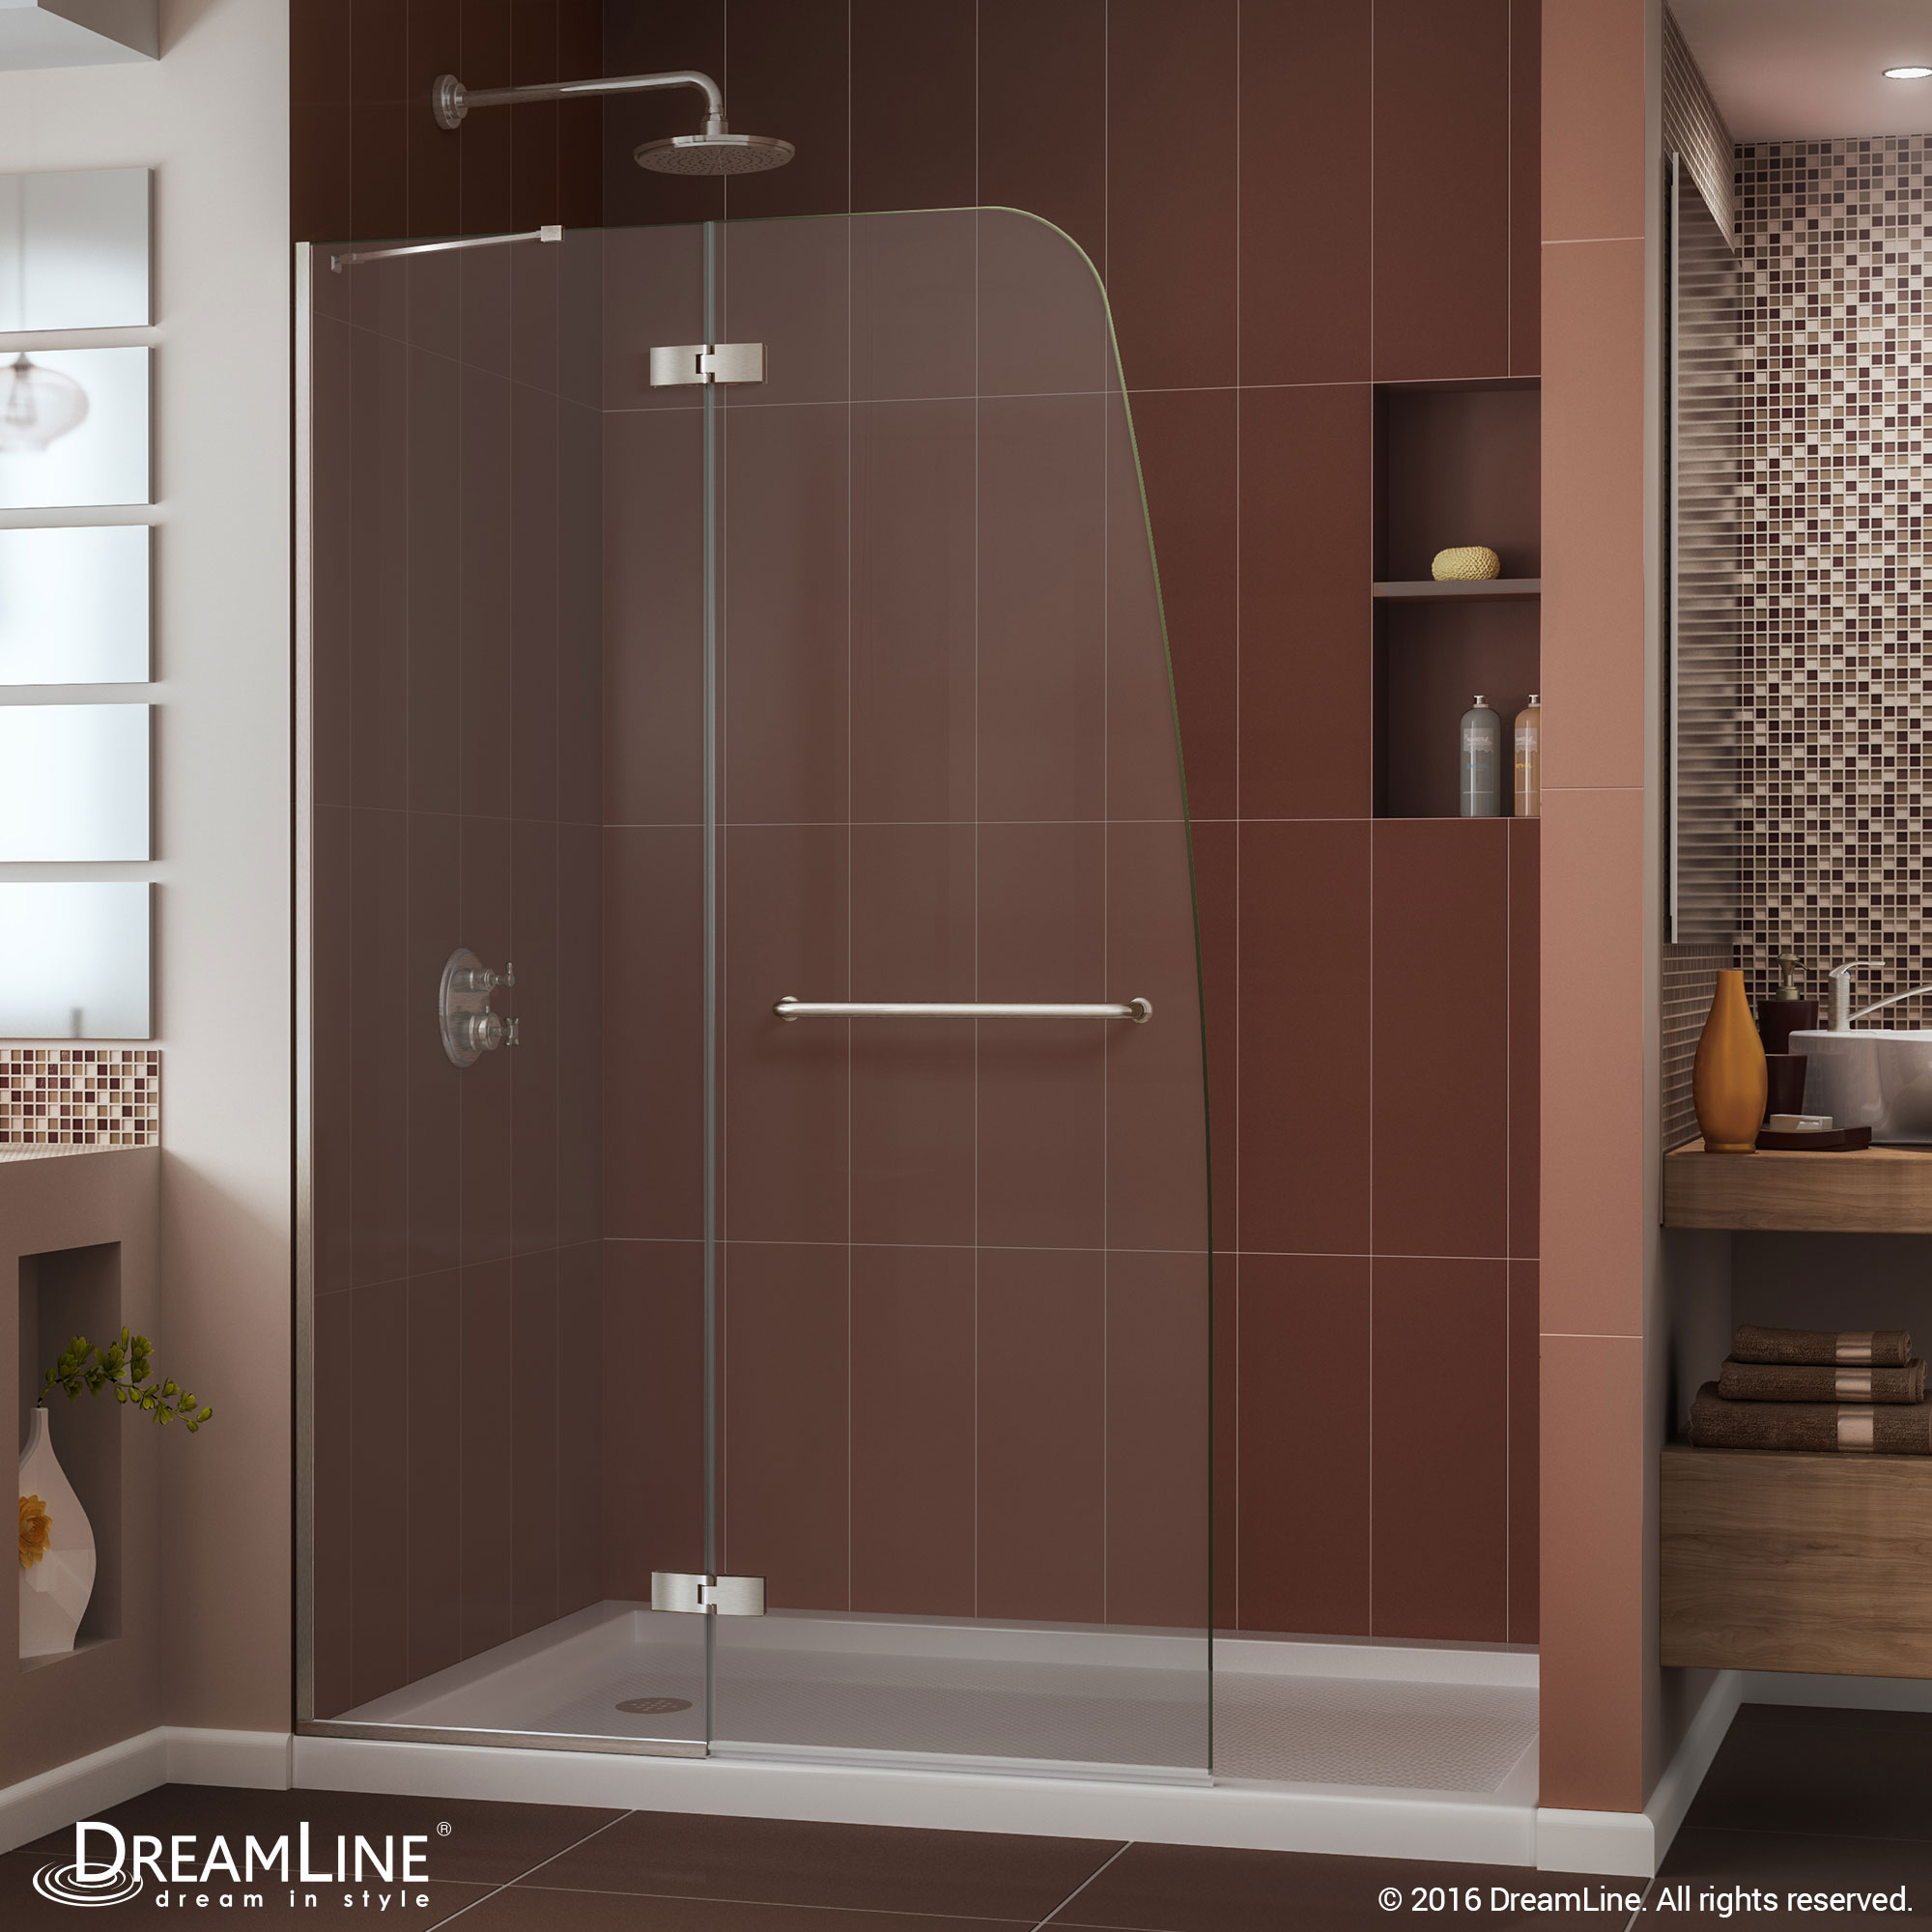 DreamLine Aqua Ultra 36 in. D x 60 in. W x 74 3/4 in. H Frameless Shower Door in Chrome and Right Drain Biscuit Base Kit